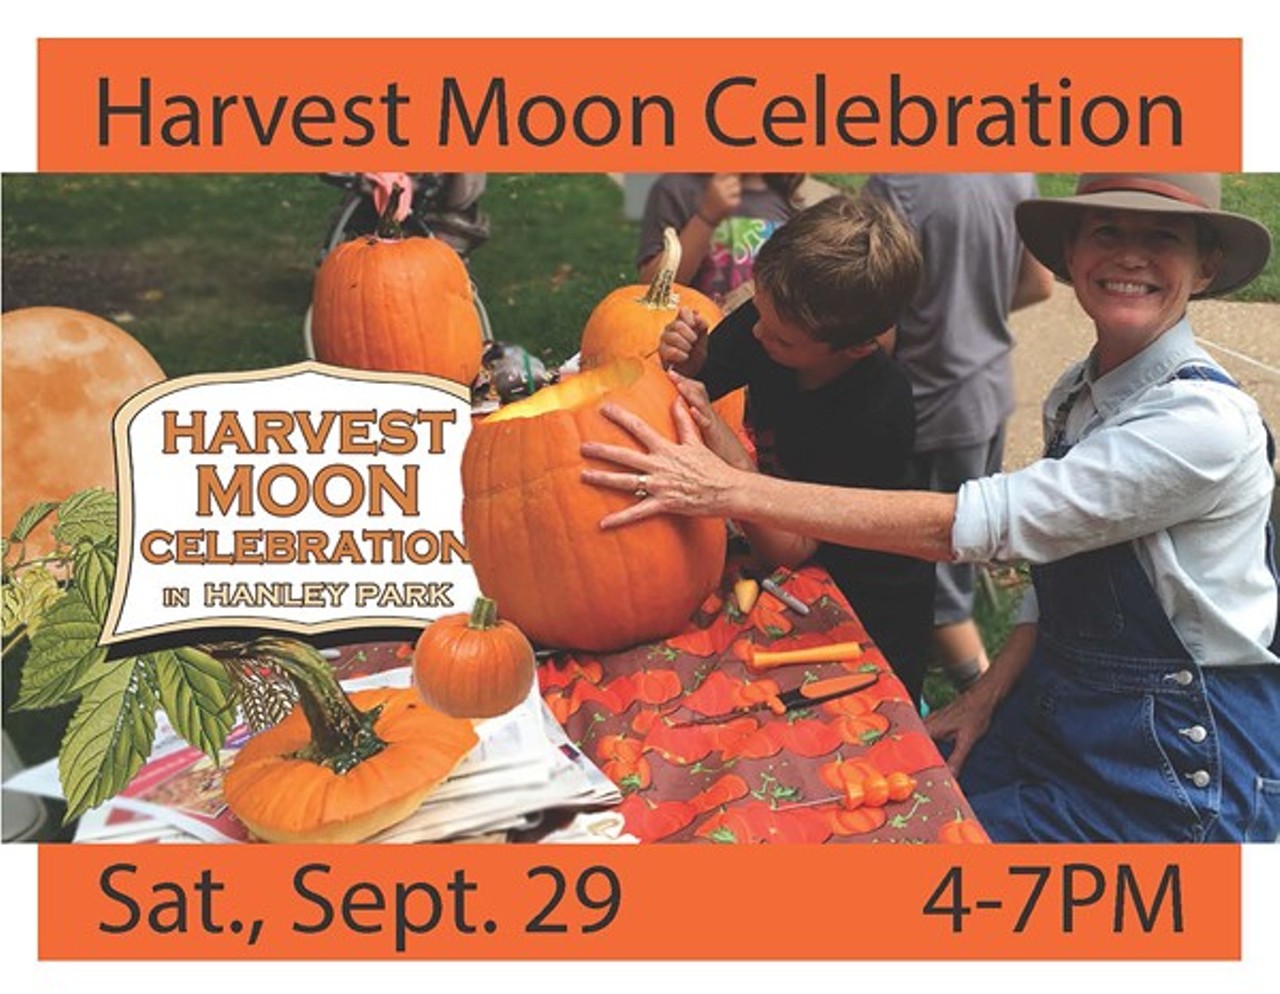 Harvest Moon Celebration
September 29, 2018
Here you can climb trees, carve pumpkins, sample pumpkin-spiced ale and listen to live music from River Bend Bluegrass. Fall is the best time of year.
Check it out here.
Photo courtesy of mrsumlauf